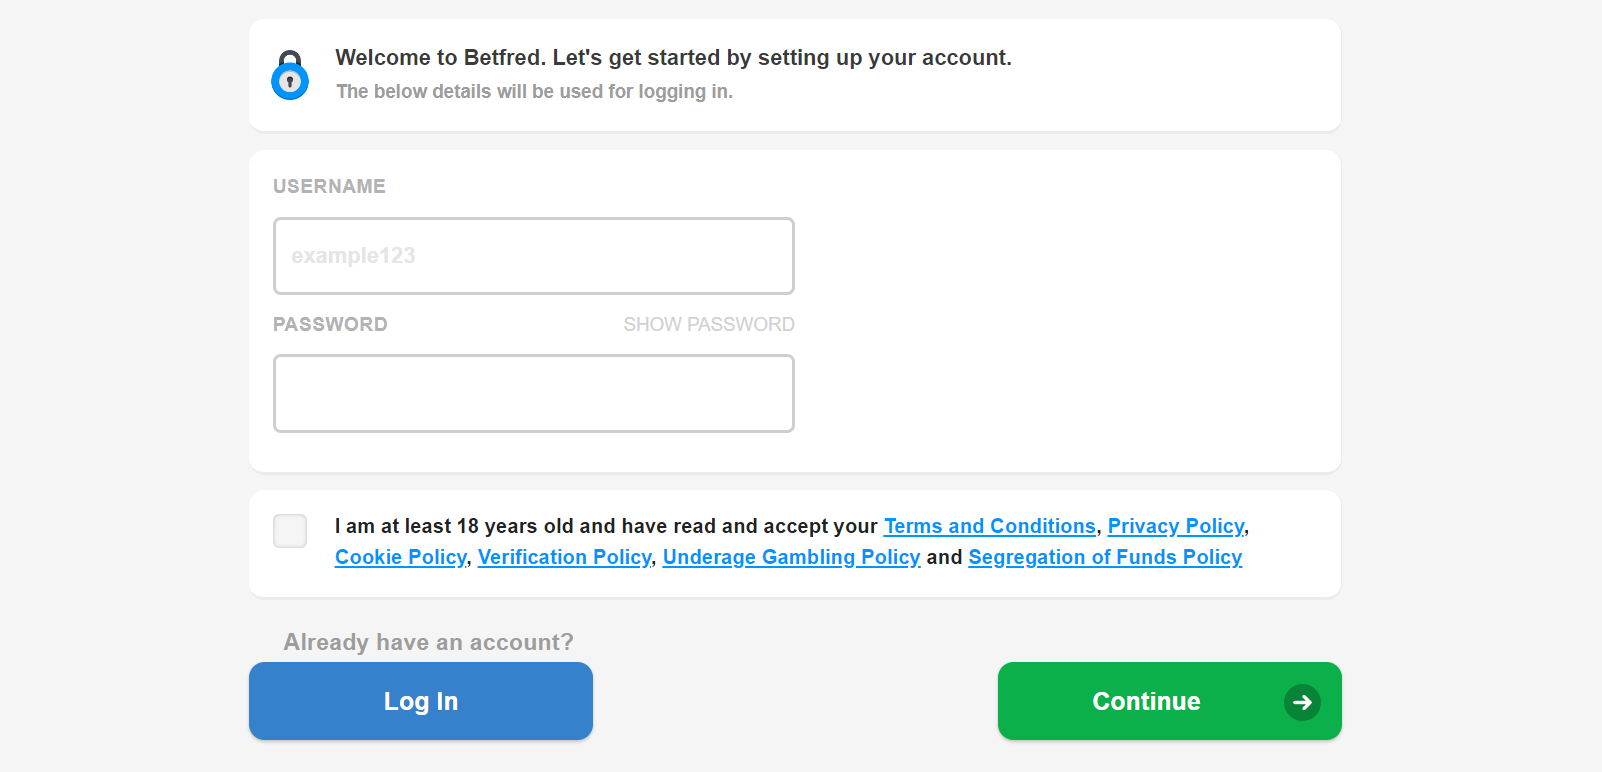 registering an cccount at betfred